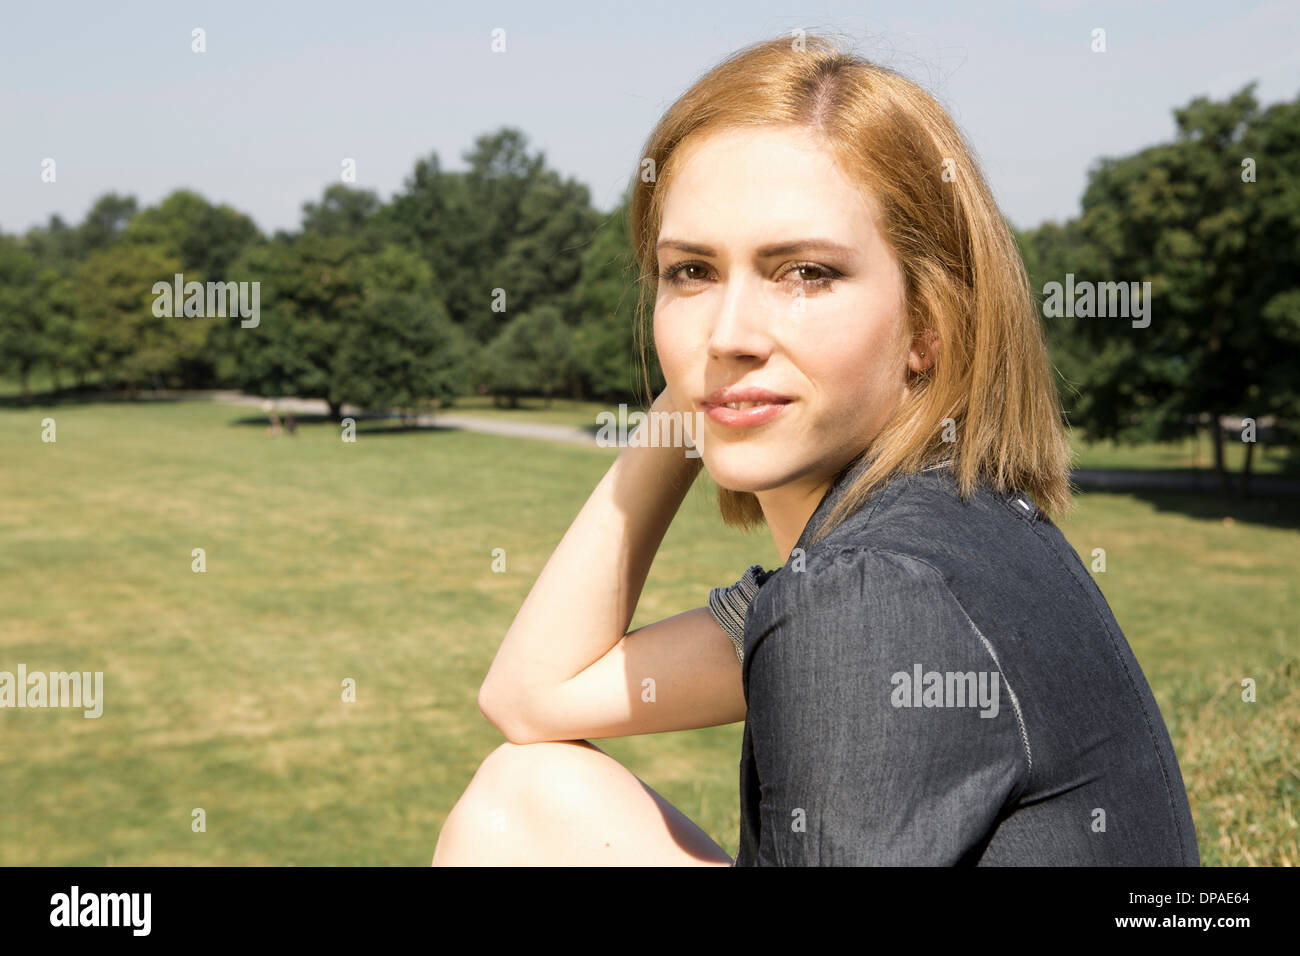 Young woman in park Stock Photo